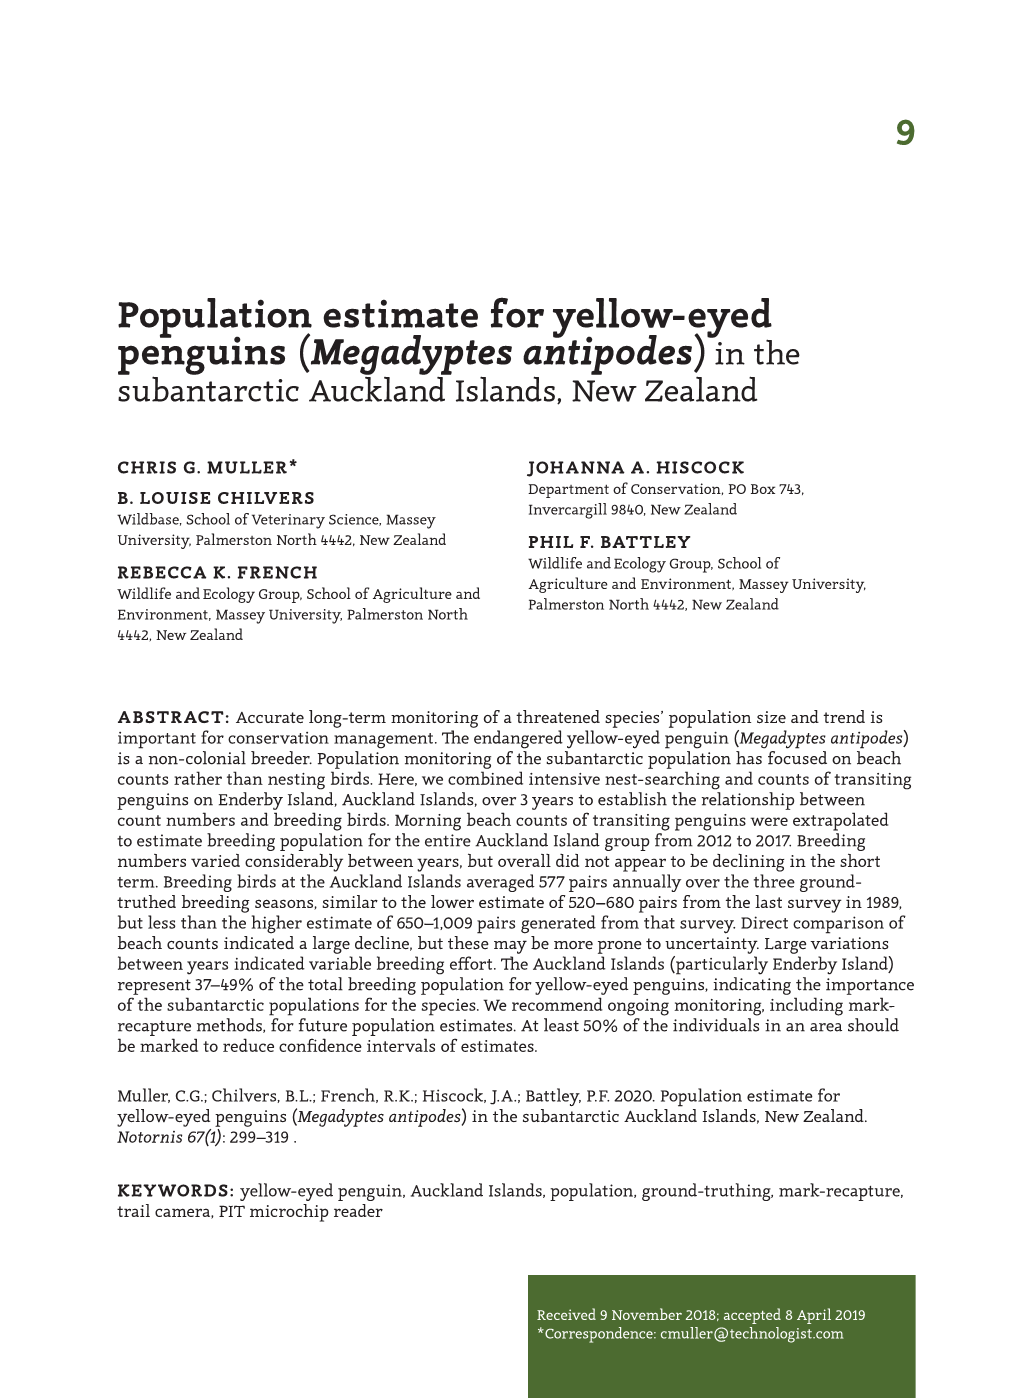 Population Estimate for Yellow-Eyed Penguins (Megadyptes Antipodes) in the Subantarctic Auckland Islands, New Zealand